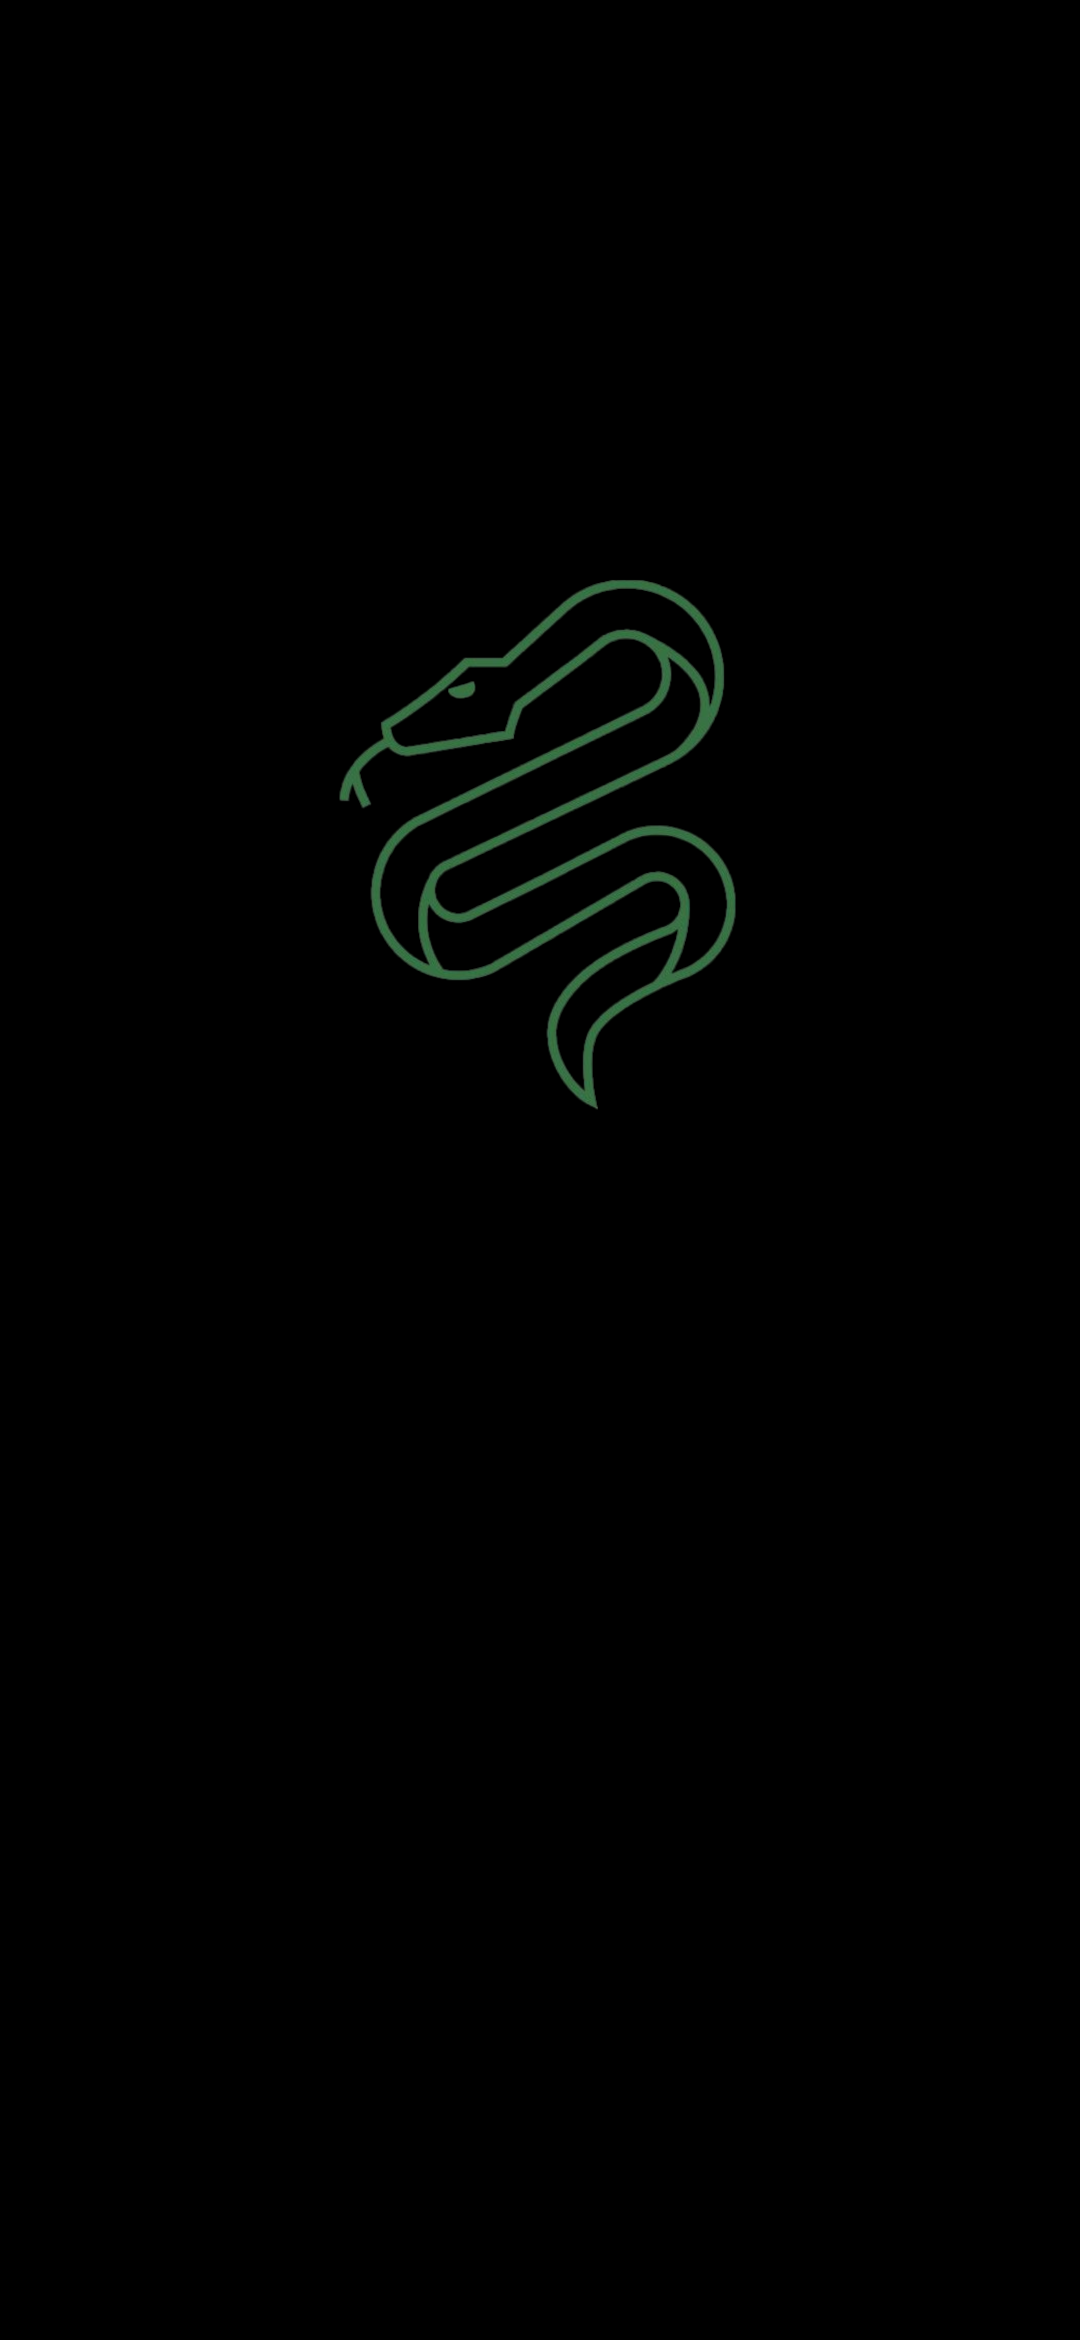 Made this minimalistic Slytherin wallpaper, feel free to download